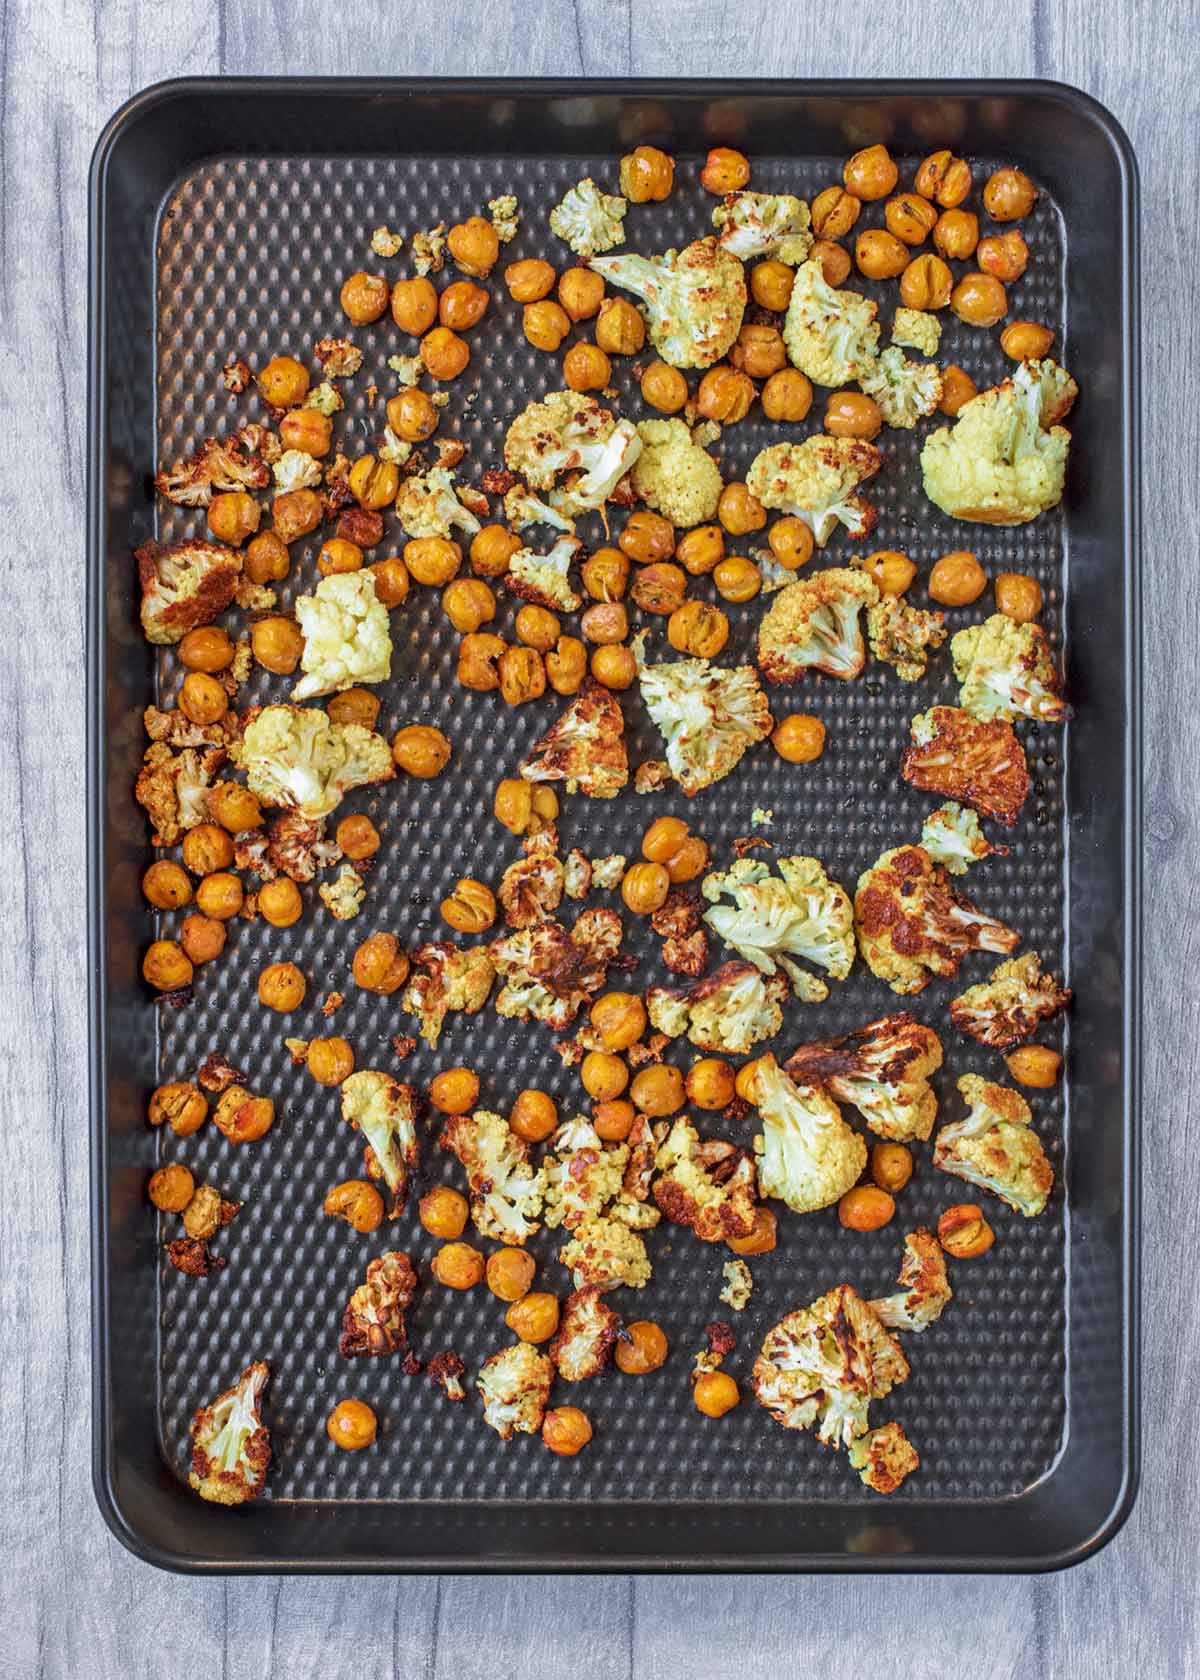 A baking tray with the chickpeas and cauliflower now roasted.